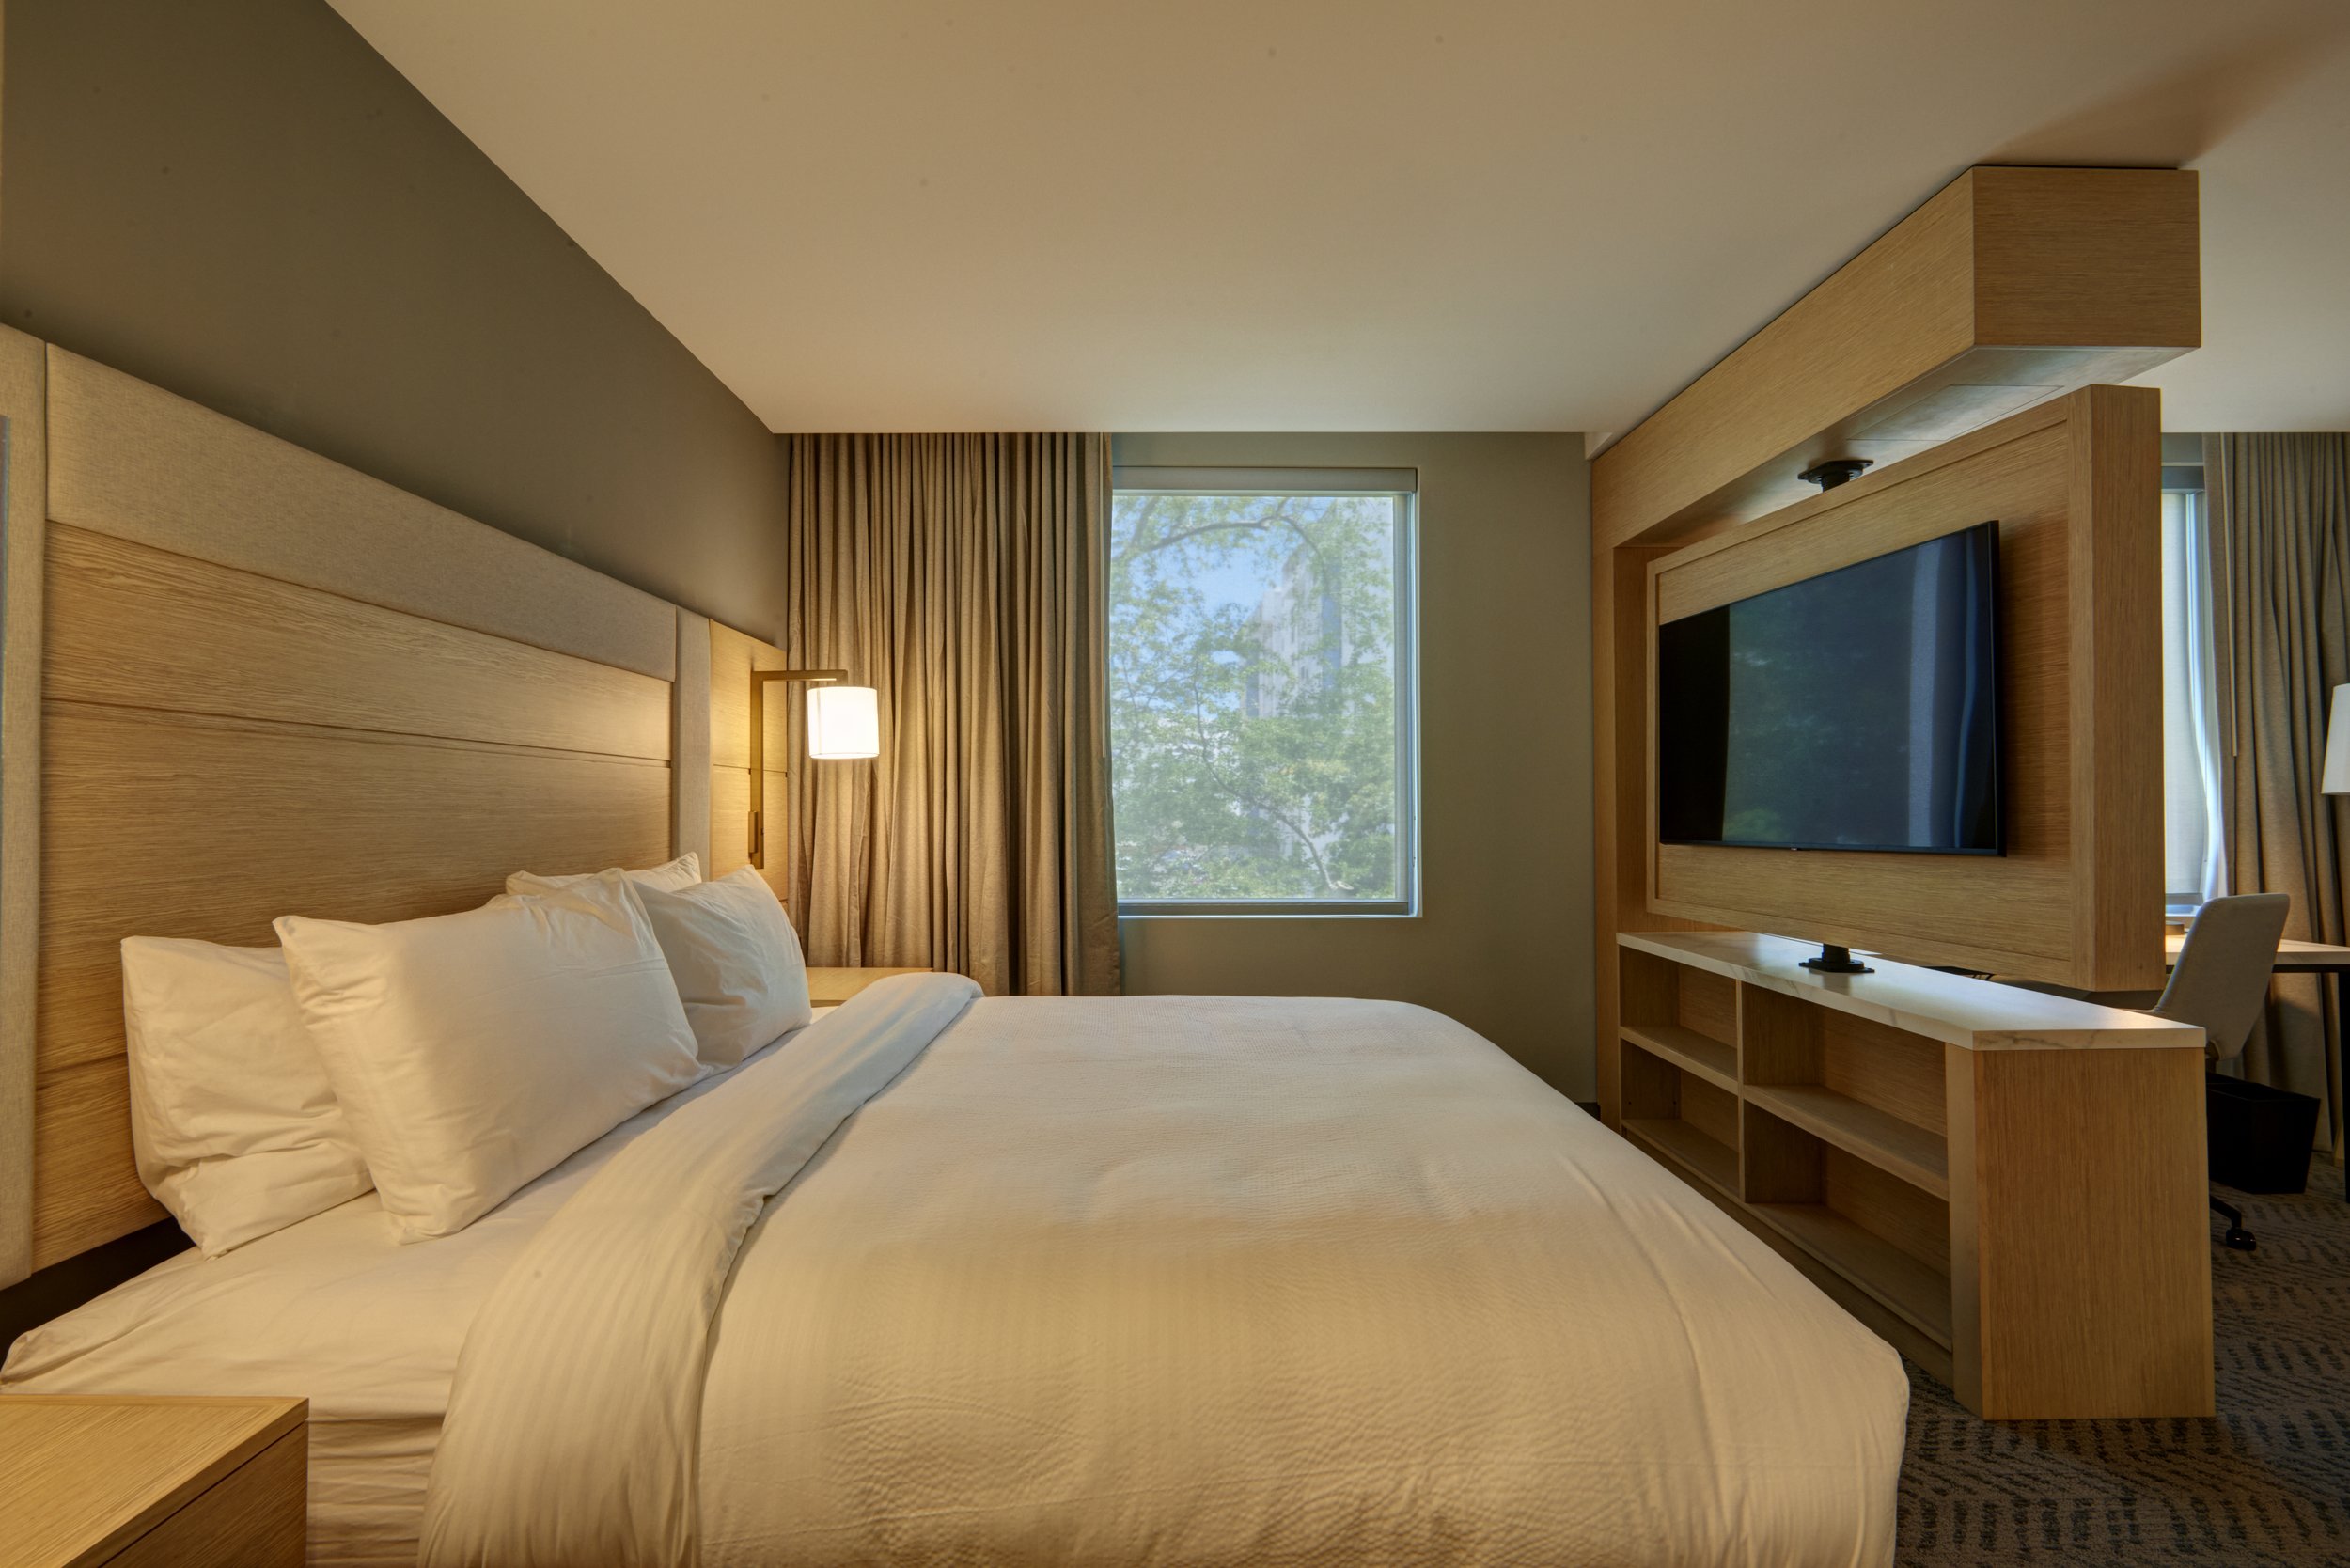  Guest room of the Residence Inn by Marriott hospitality project. 